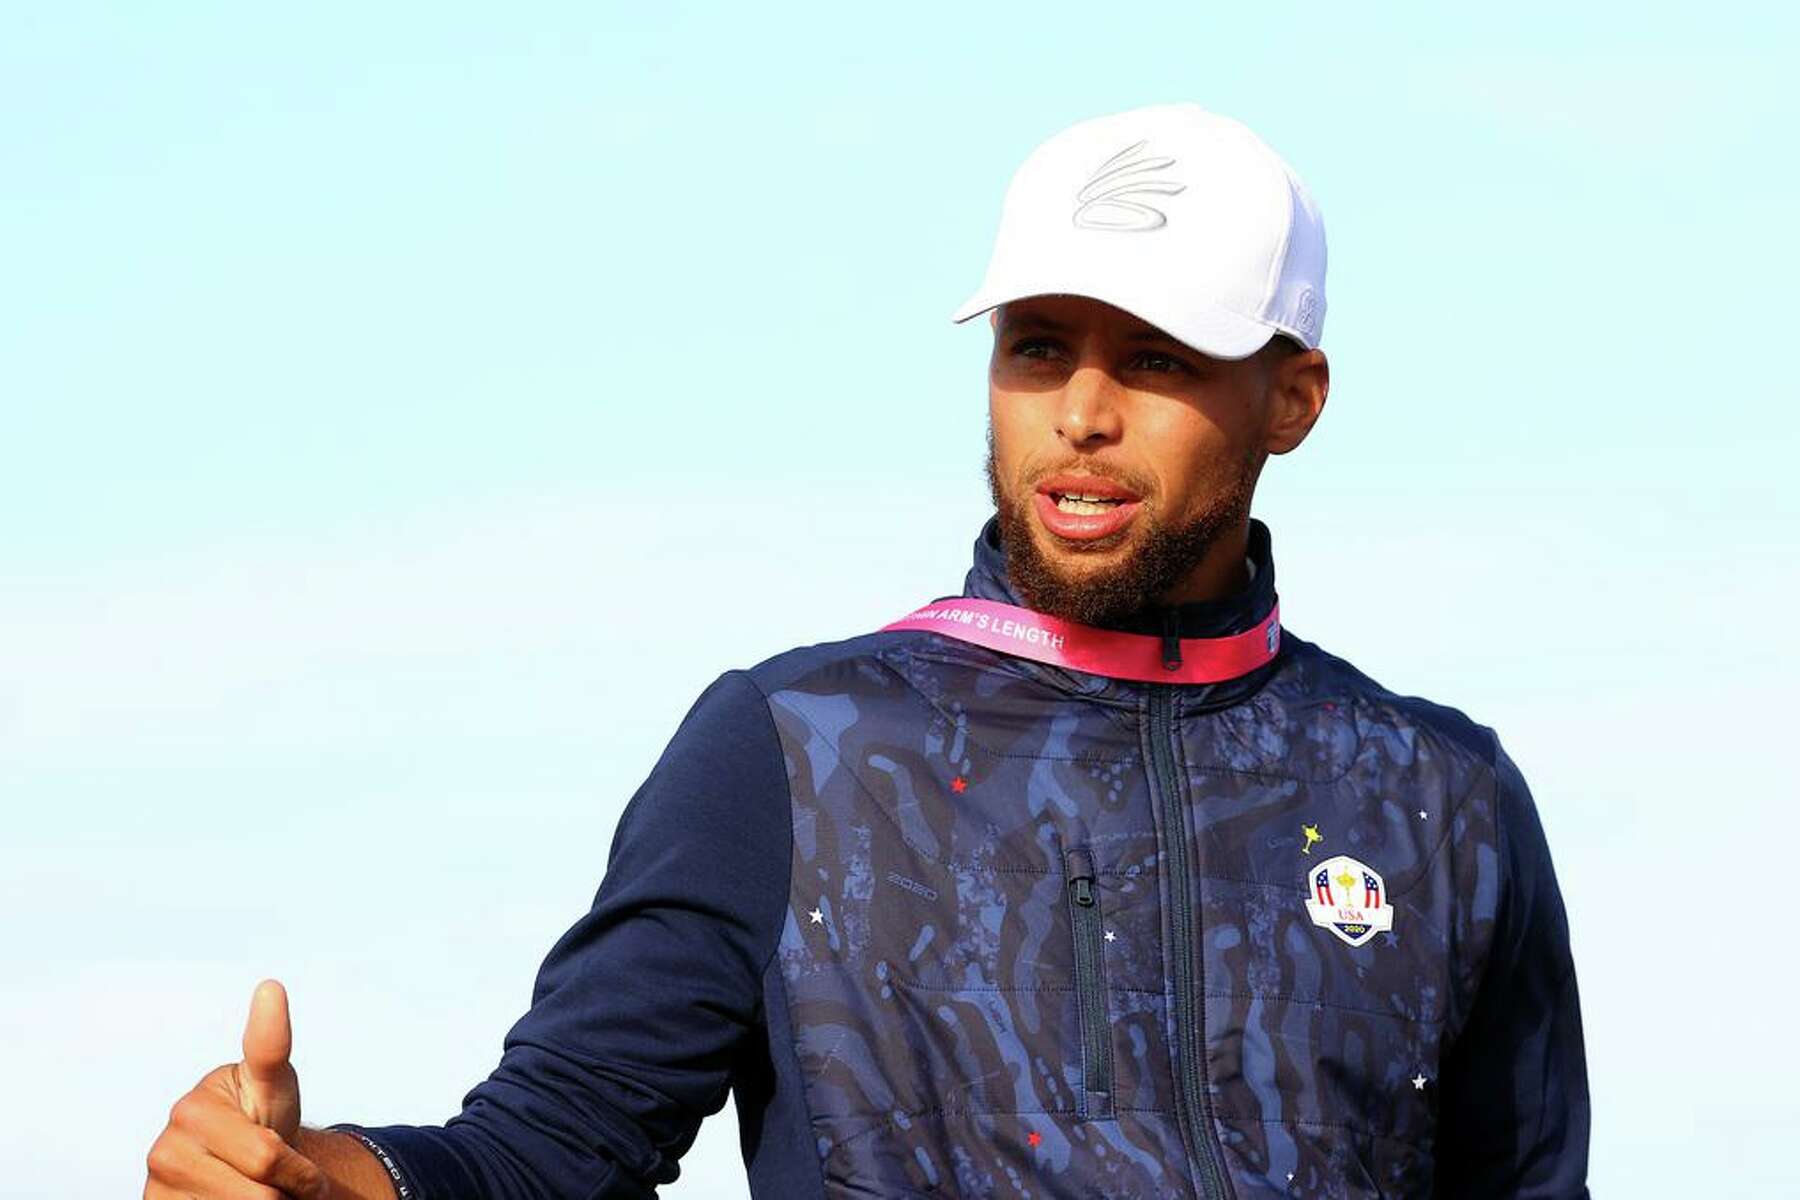 Steph Curry Michael Jordan discuss competition, their for golf, and Ryder Cup